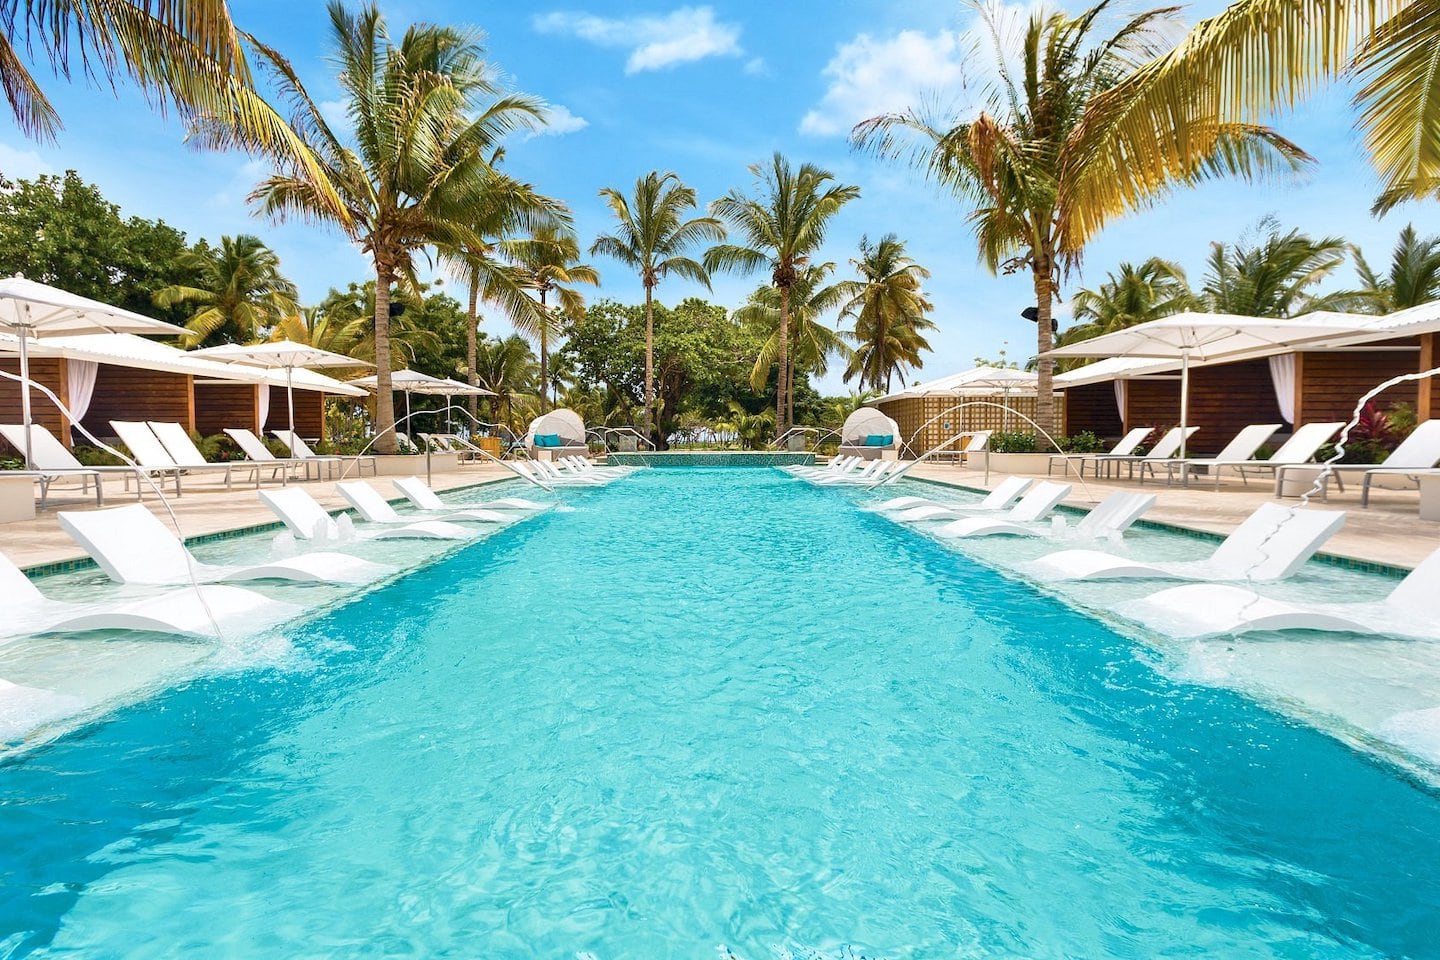 Serenity at Coconut Bay adults-only all-inclusive Caribbean resorts